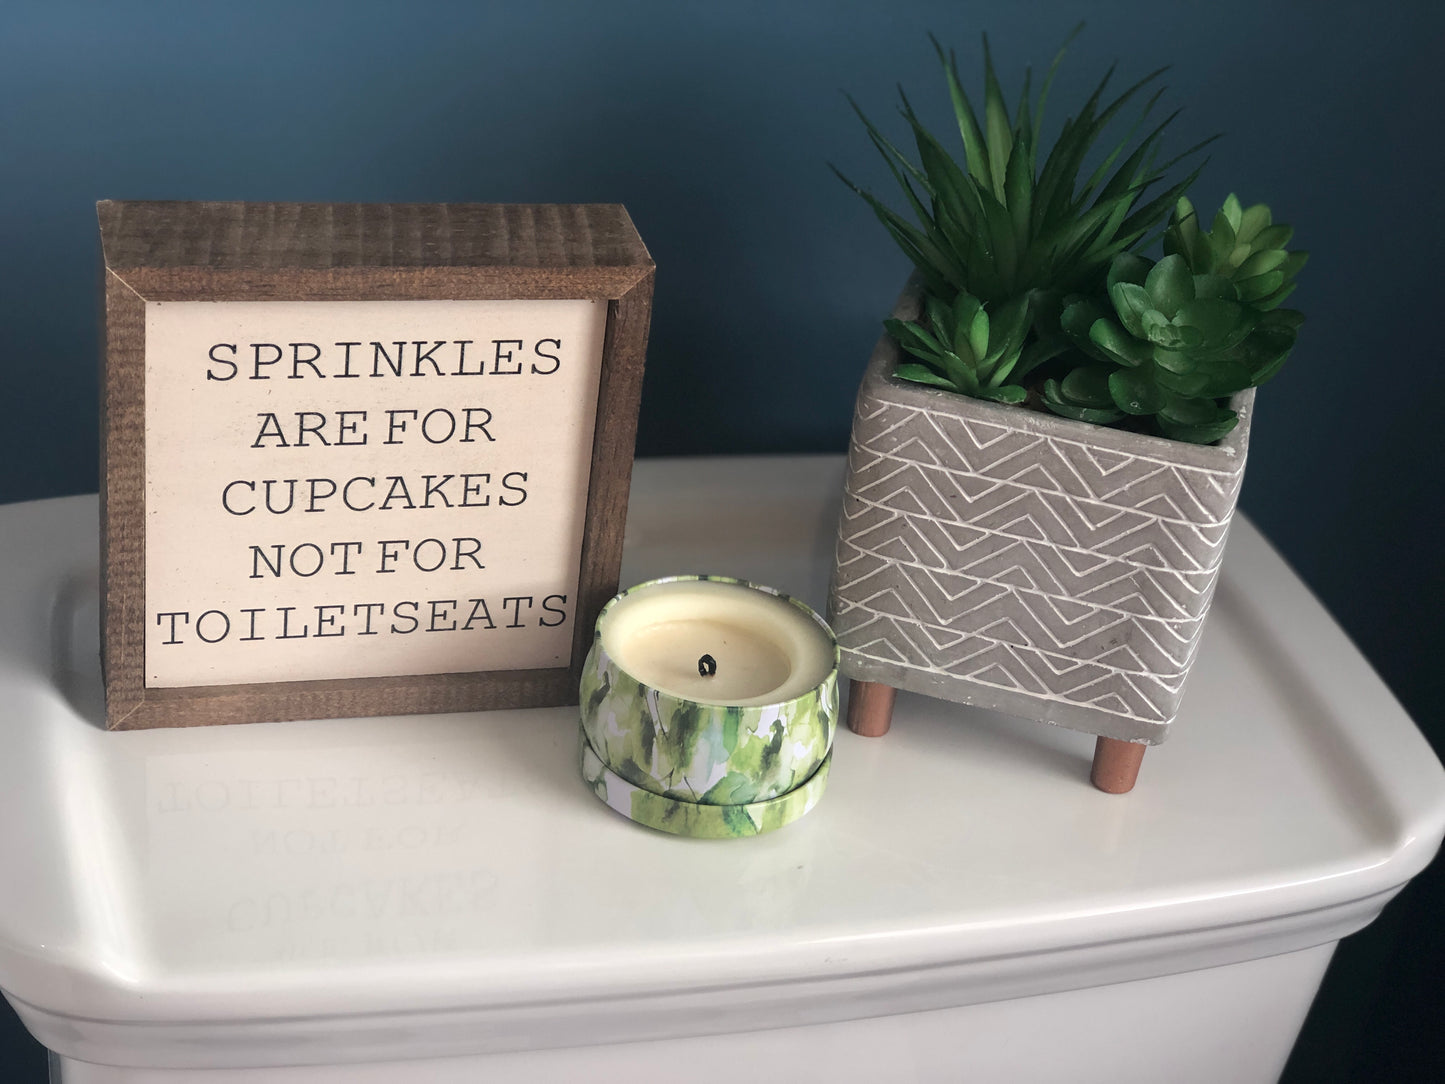 Sprinkles Are a For Cupcakes Not Toilet Sears Wood Home Sign